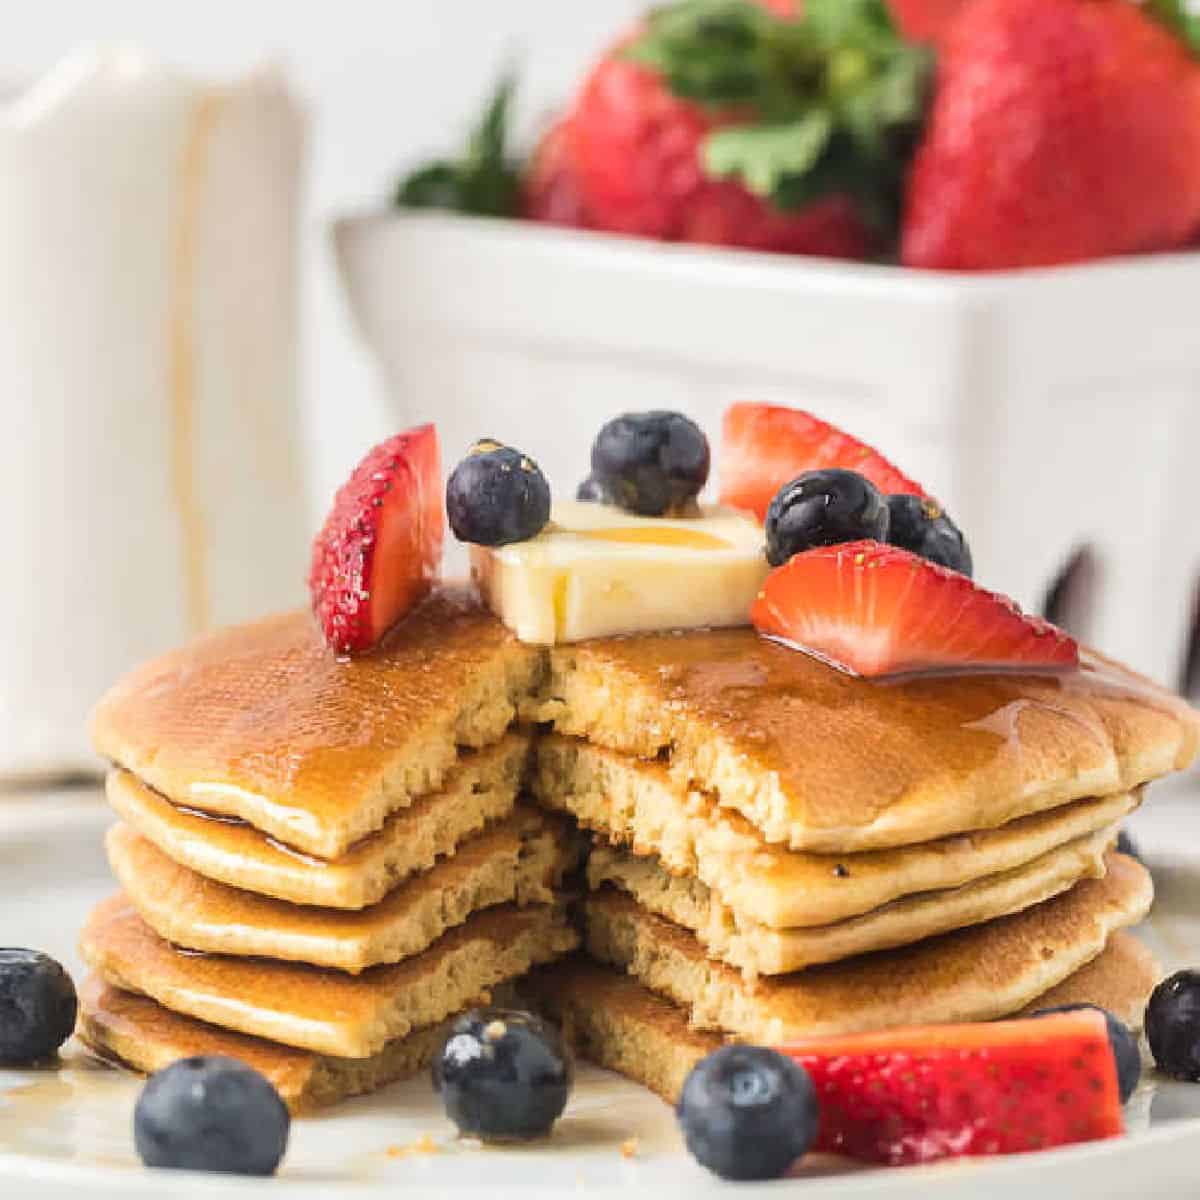 Gluten free pancakes stacked on a plate topped with butter, strawberries and blueberries